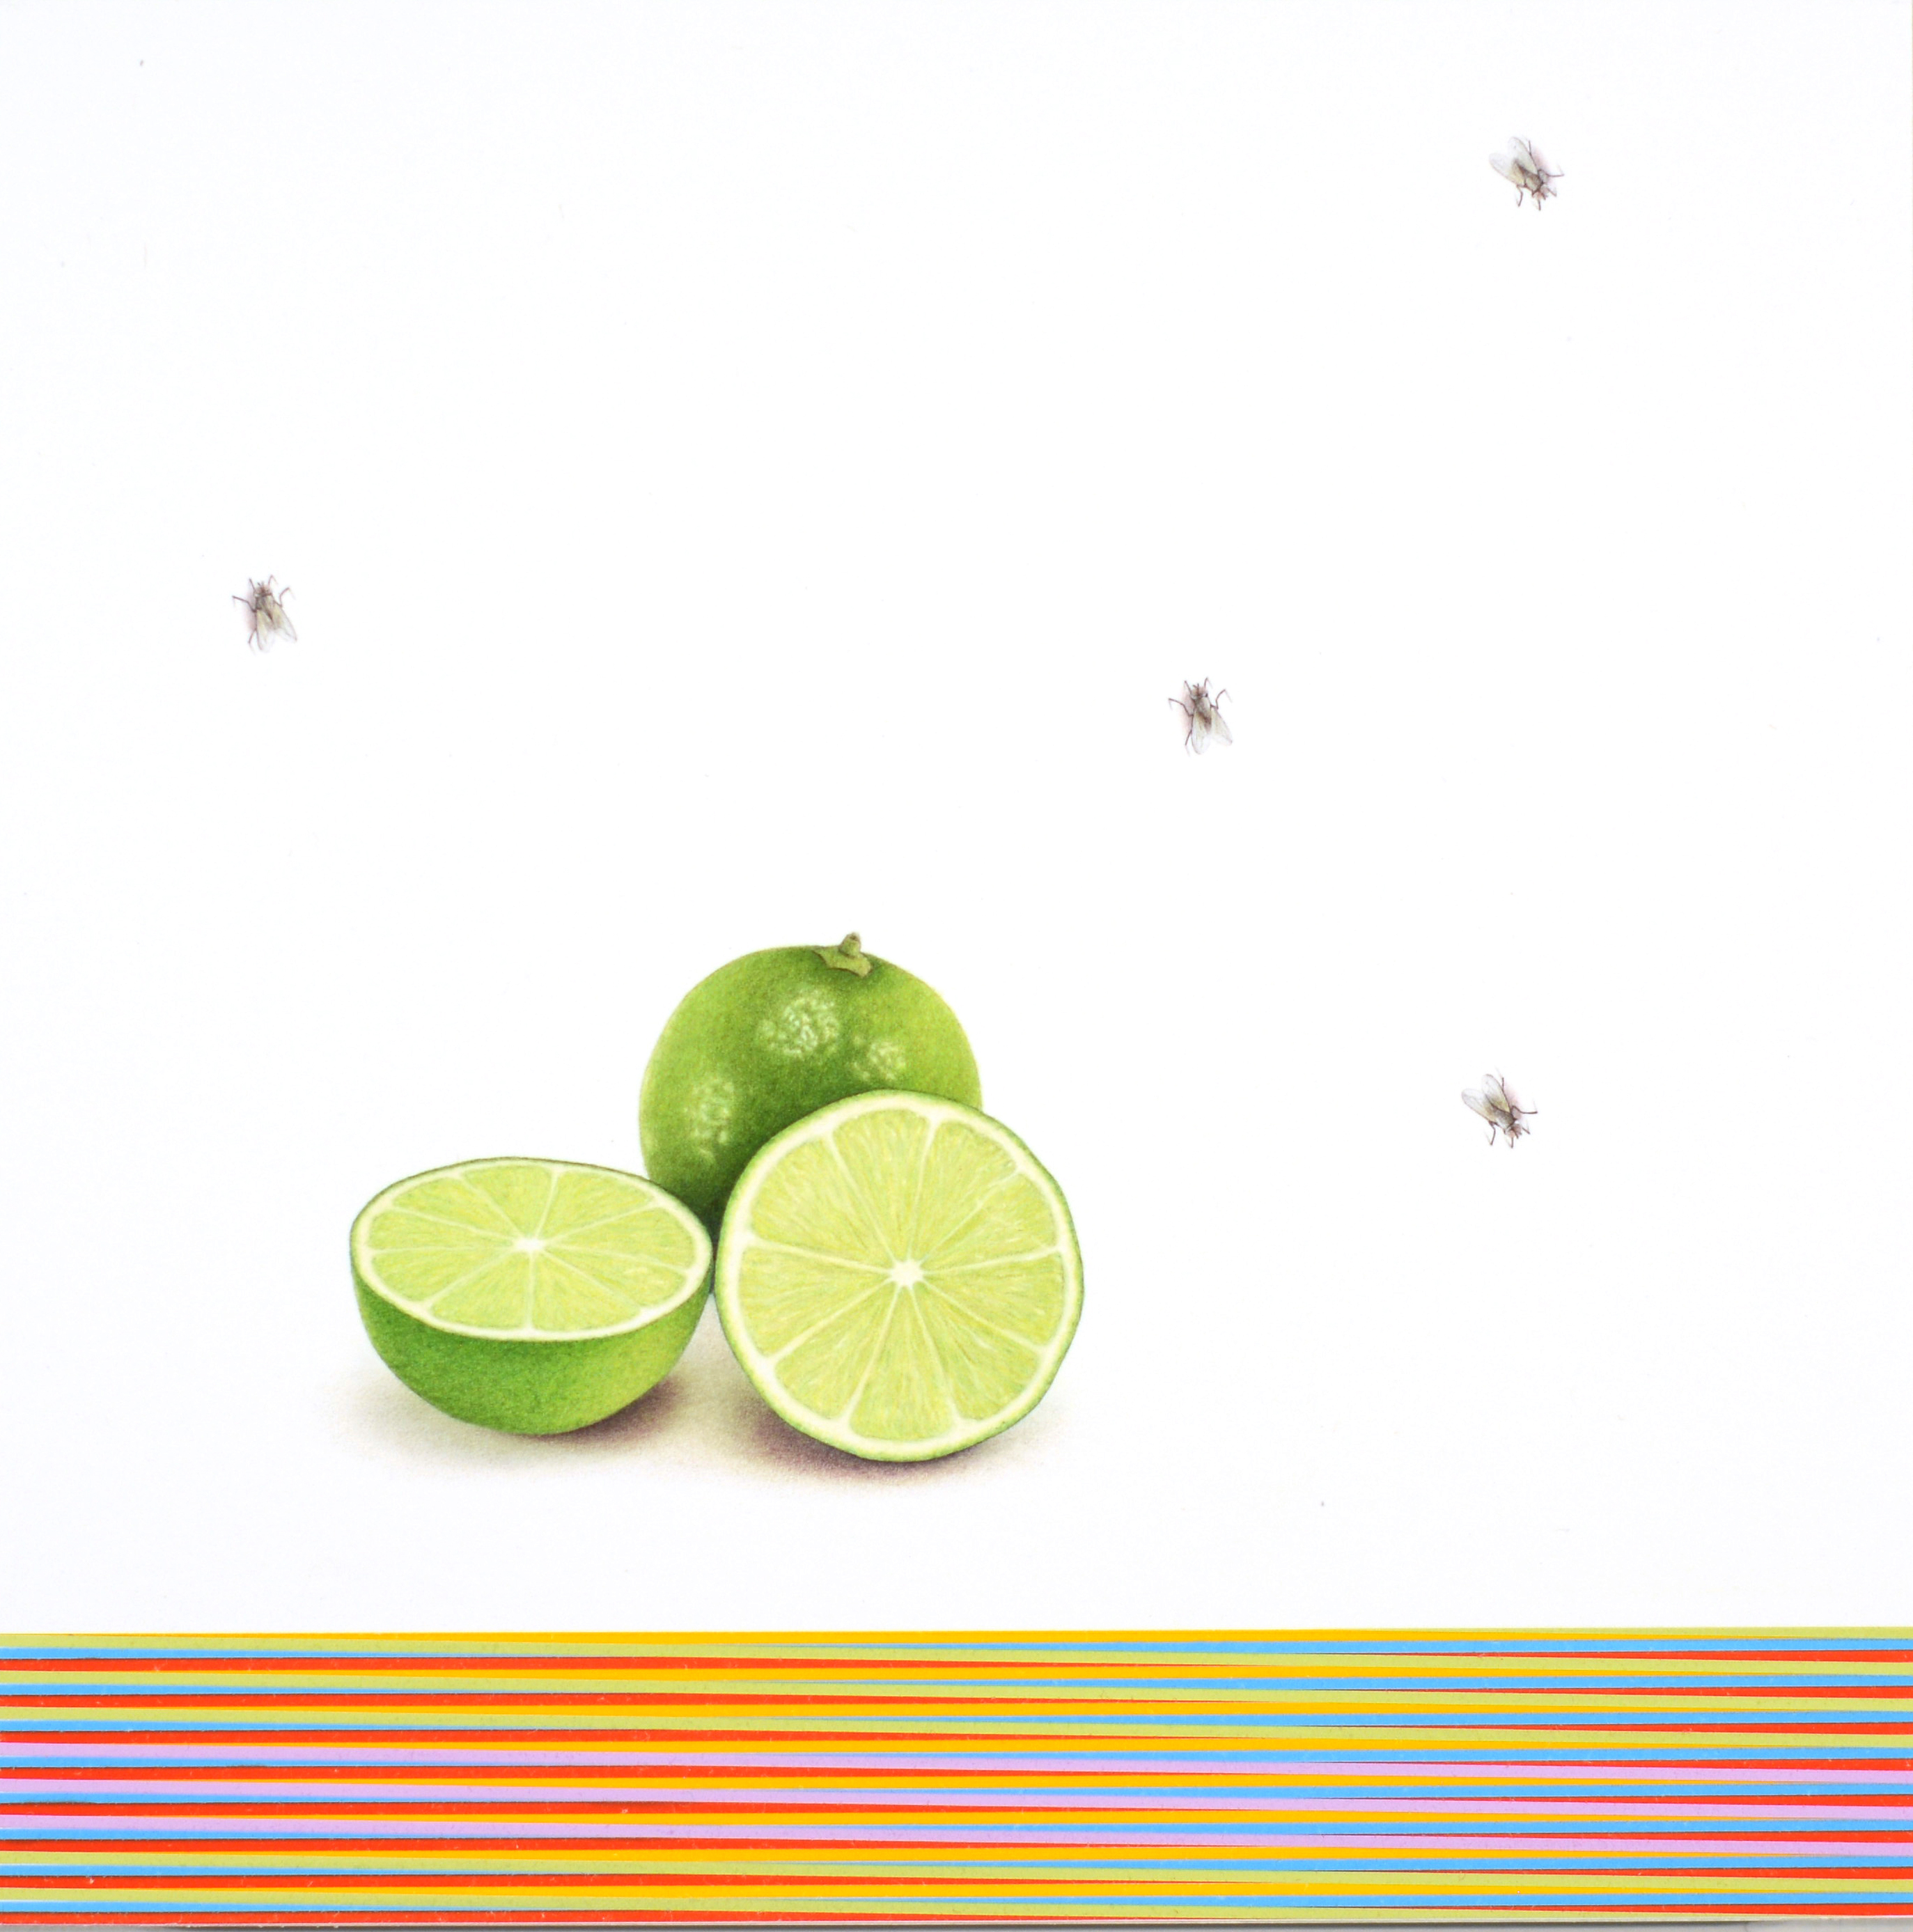 Francisco Souto, Two Limes and Four Flies, 10" x 10", 2018, colored pencils on paper.